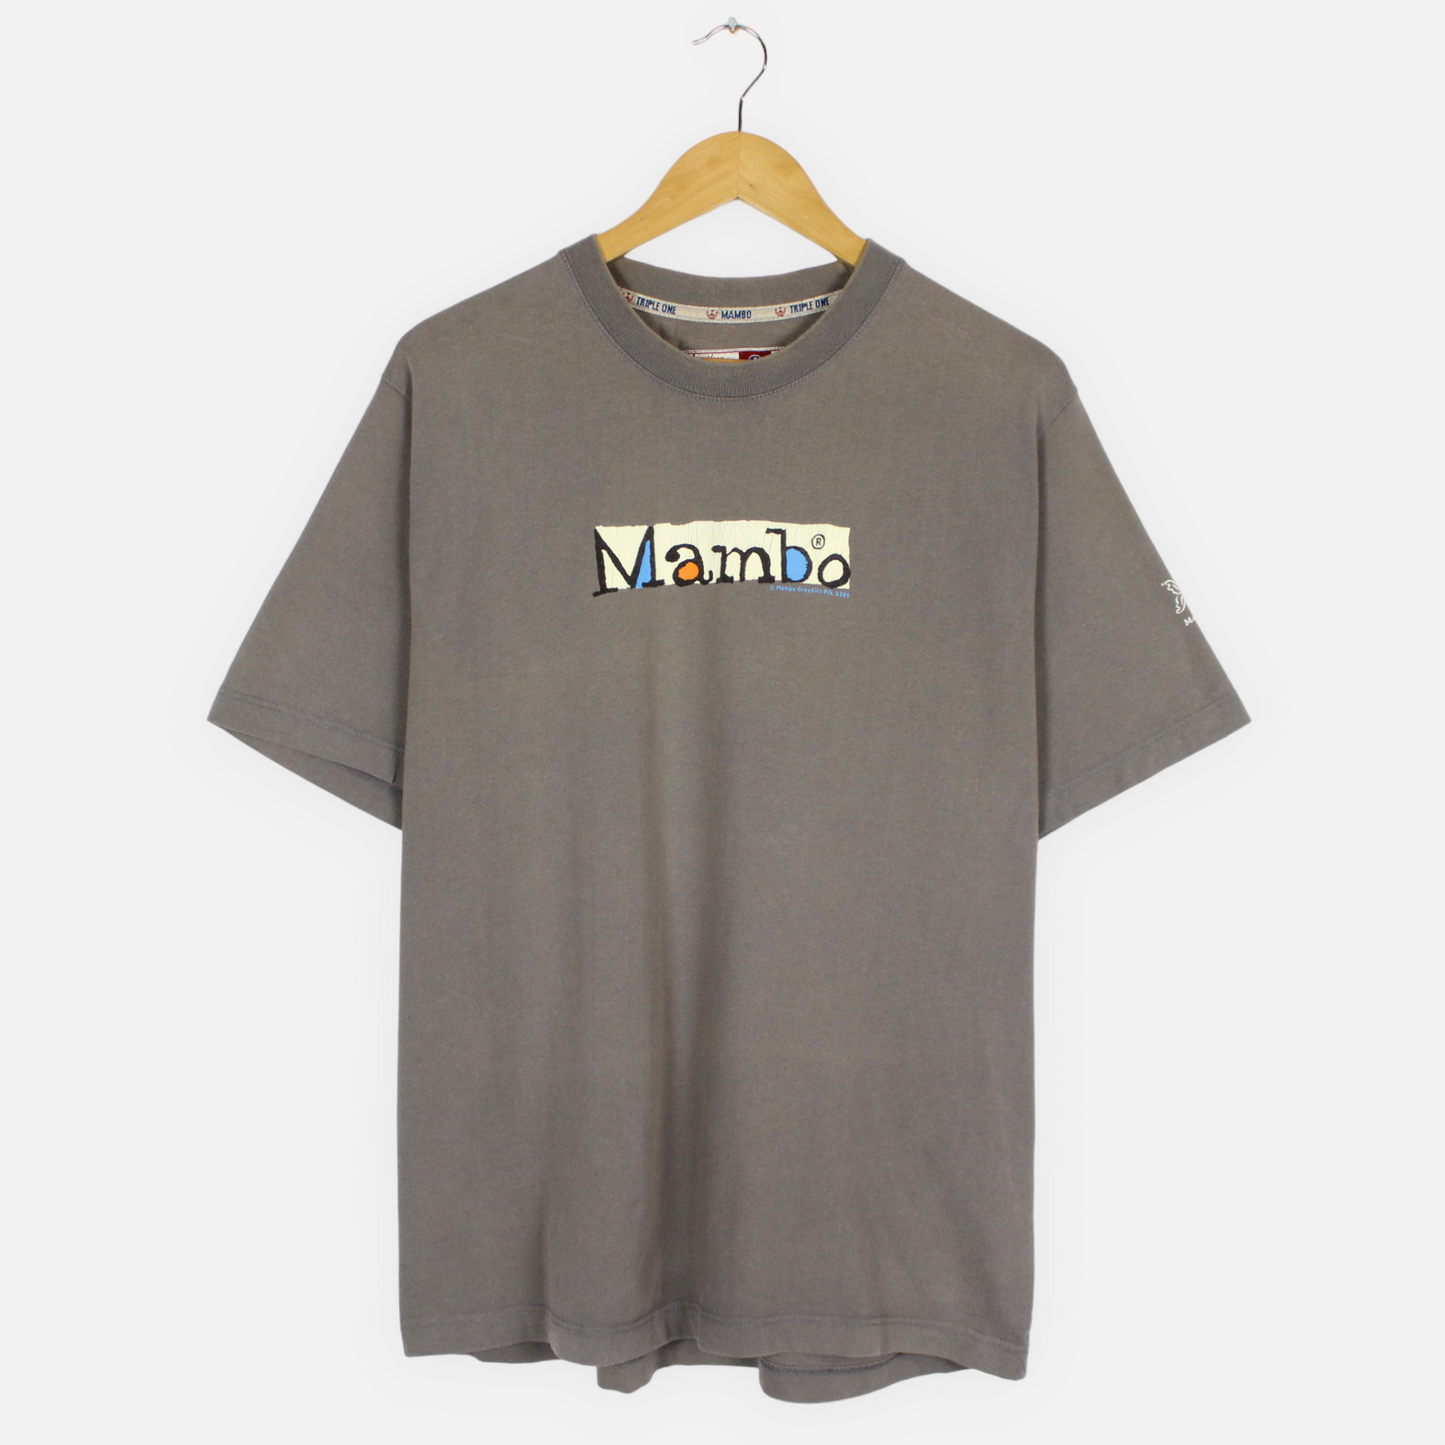 Vintage 2001 Mambo Cock Up Tee - M